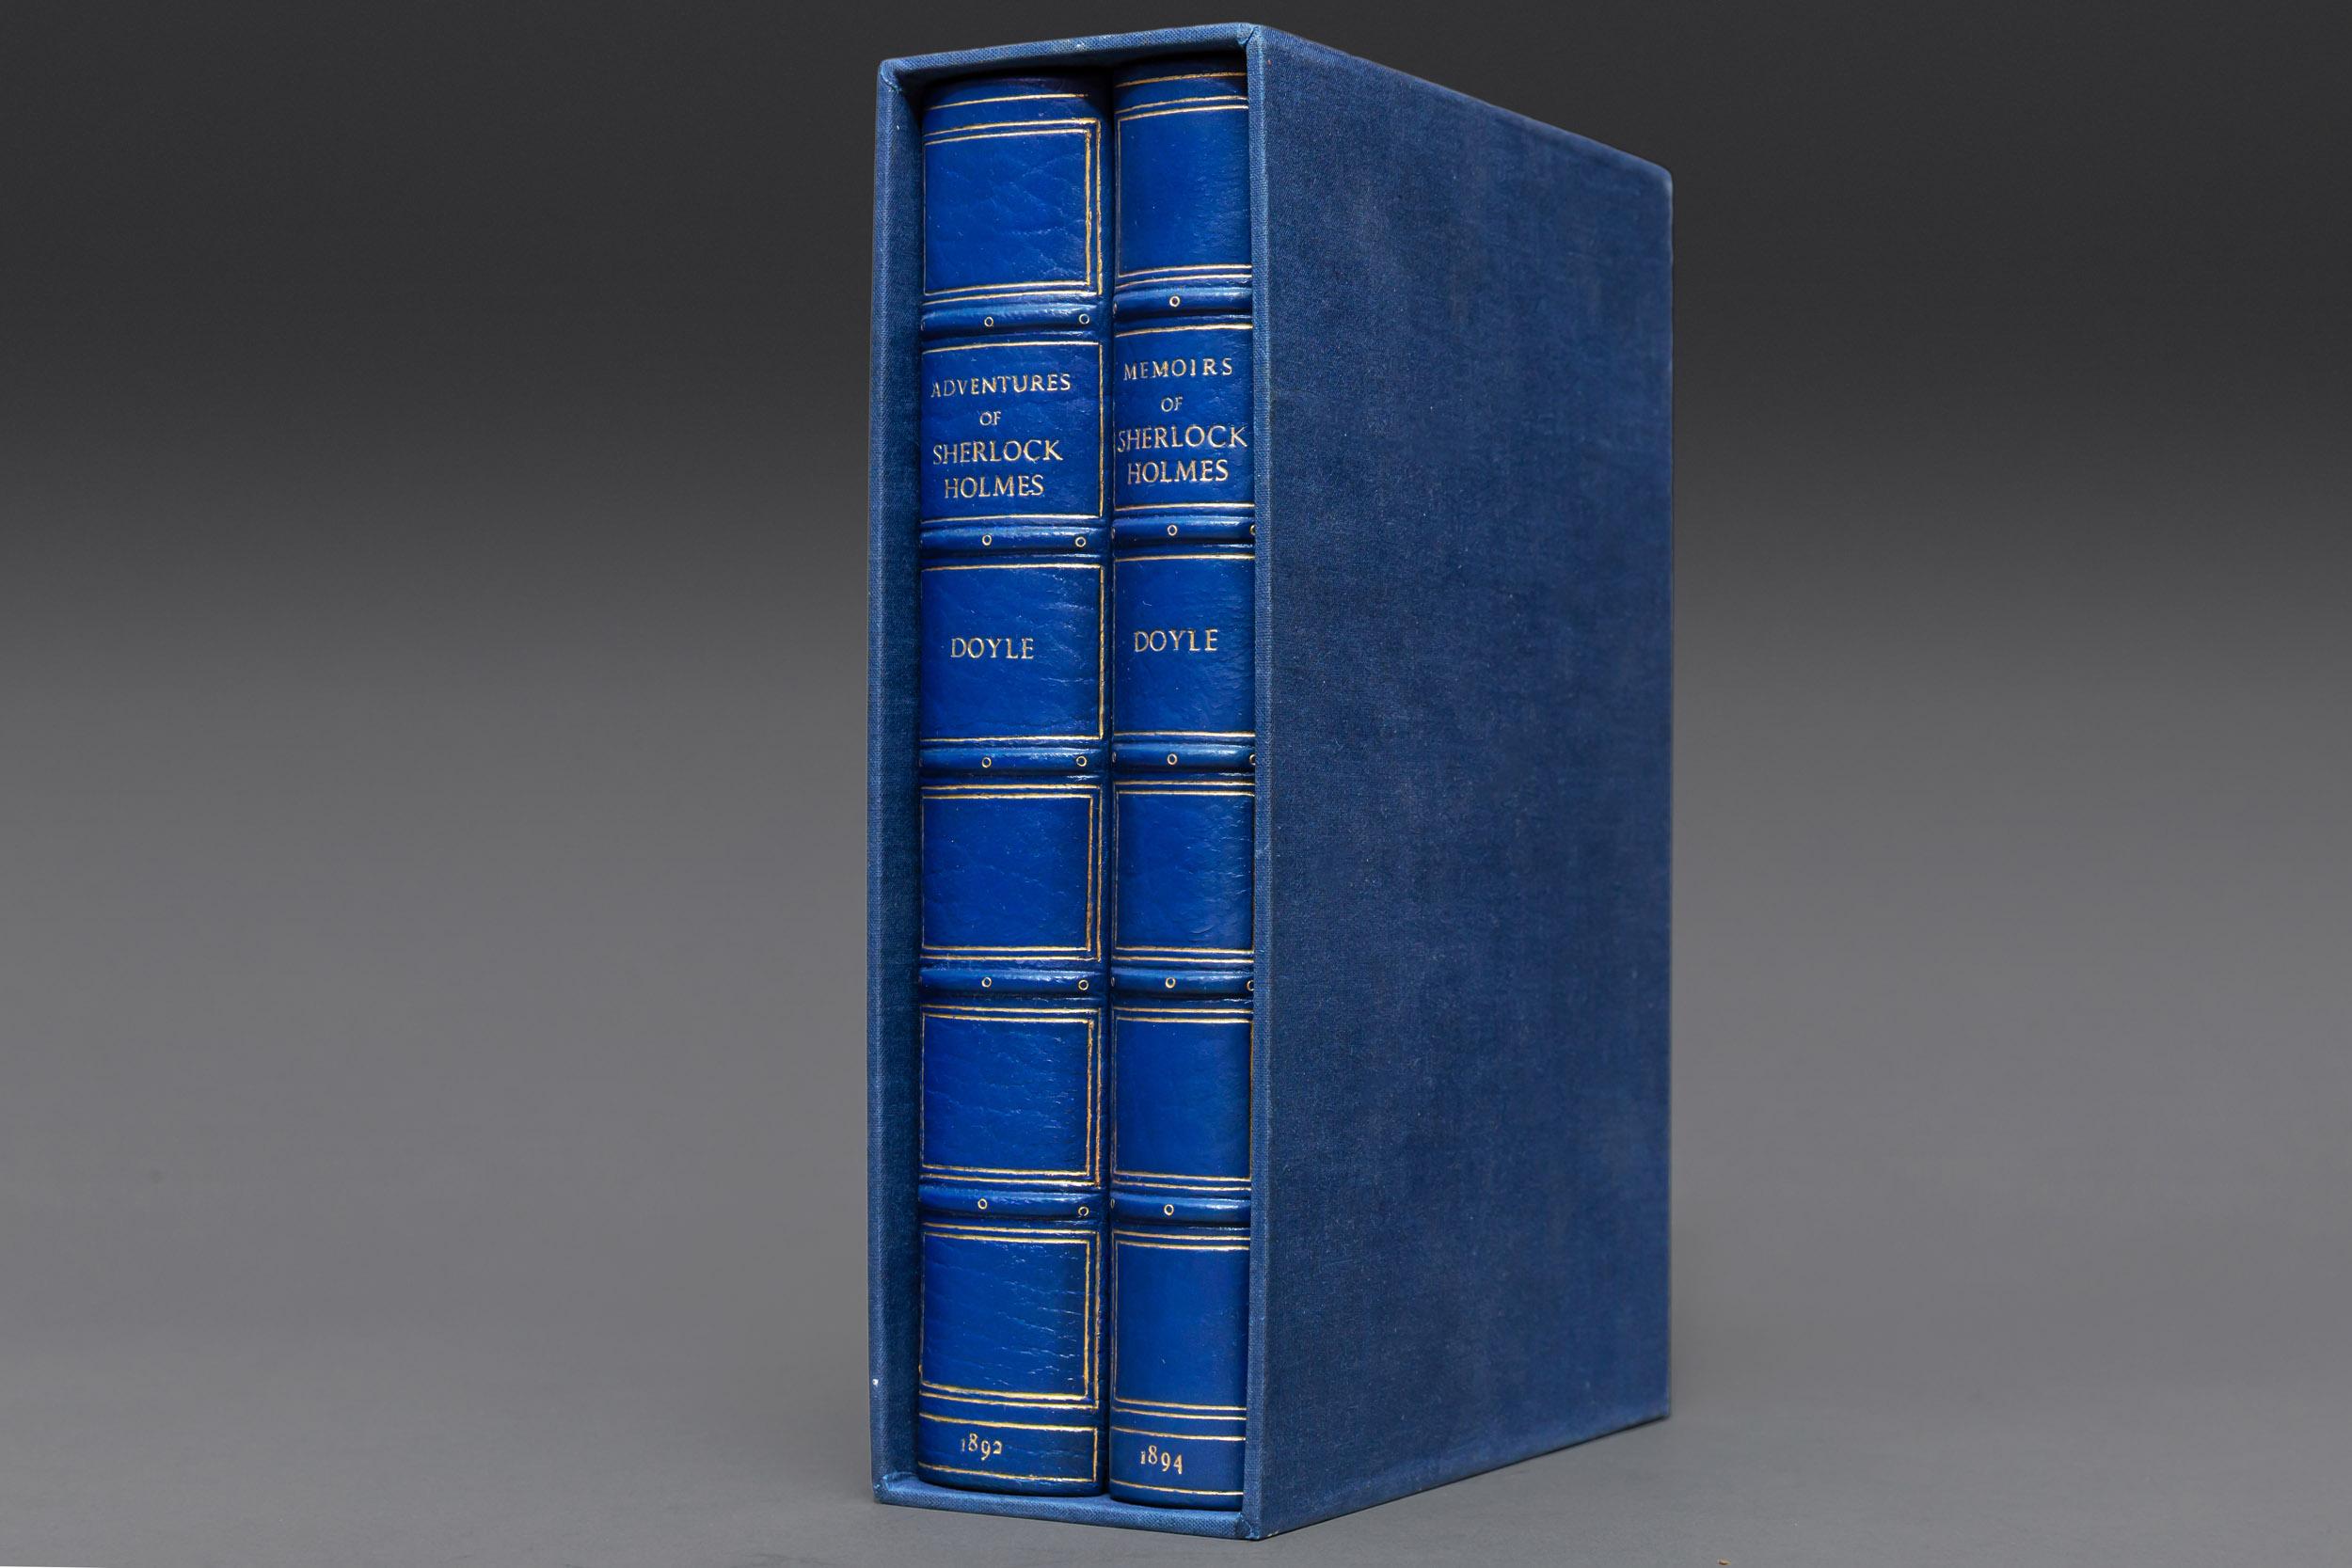 2 Volumes

First edition with the misprint “Violent Hunter” or Violet Hunter” on page 317.

With 104 illustrations by Sidney Paget in the text and other 90 illustrations. 

Bound In Full Blue Morocco by Bayntun, gilt on covers and spines, all